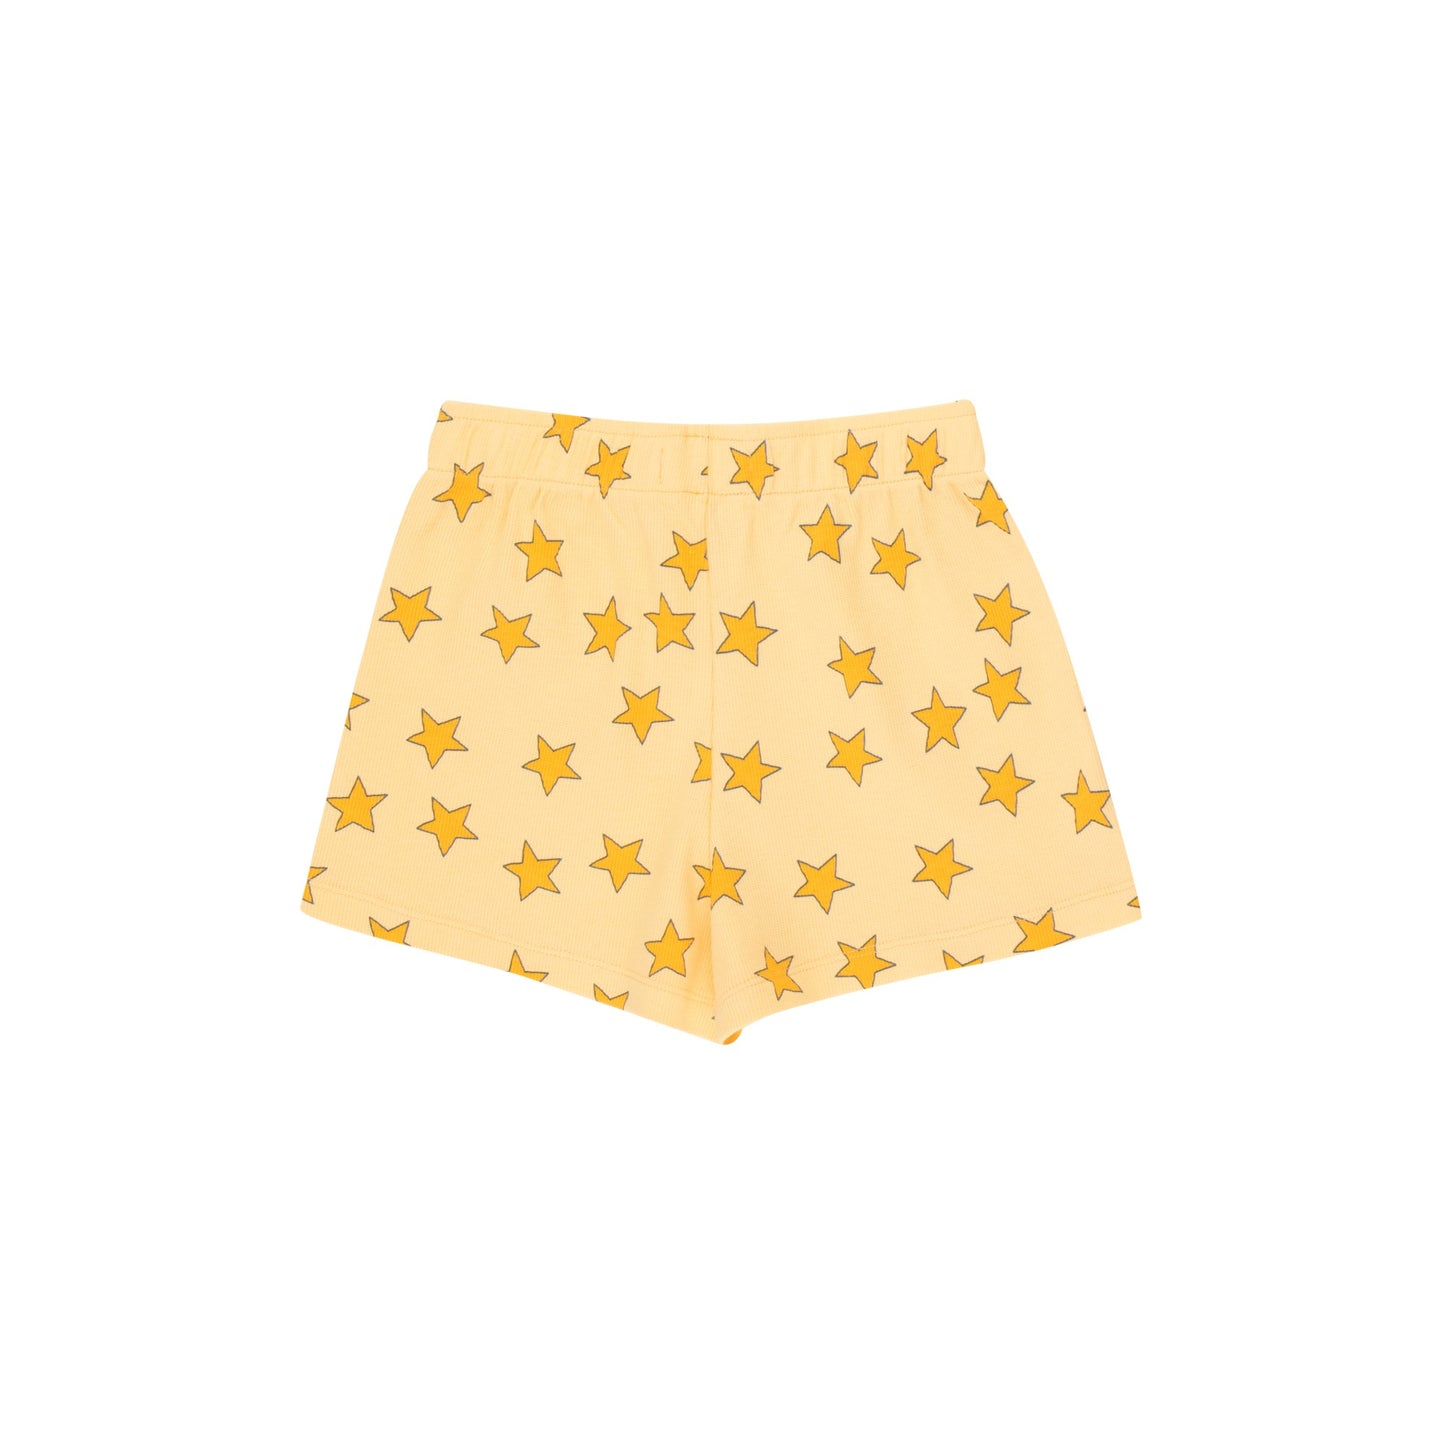 TINYCOTTONS Stars Short ALWAYS SHOW